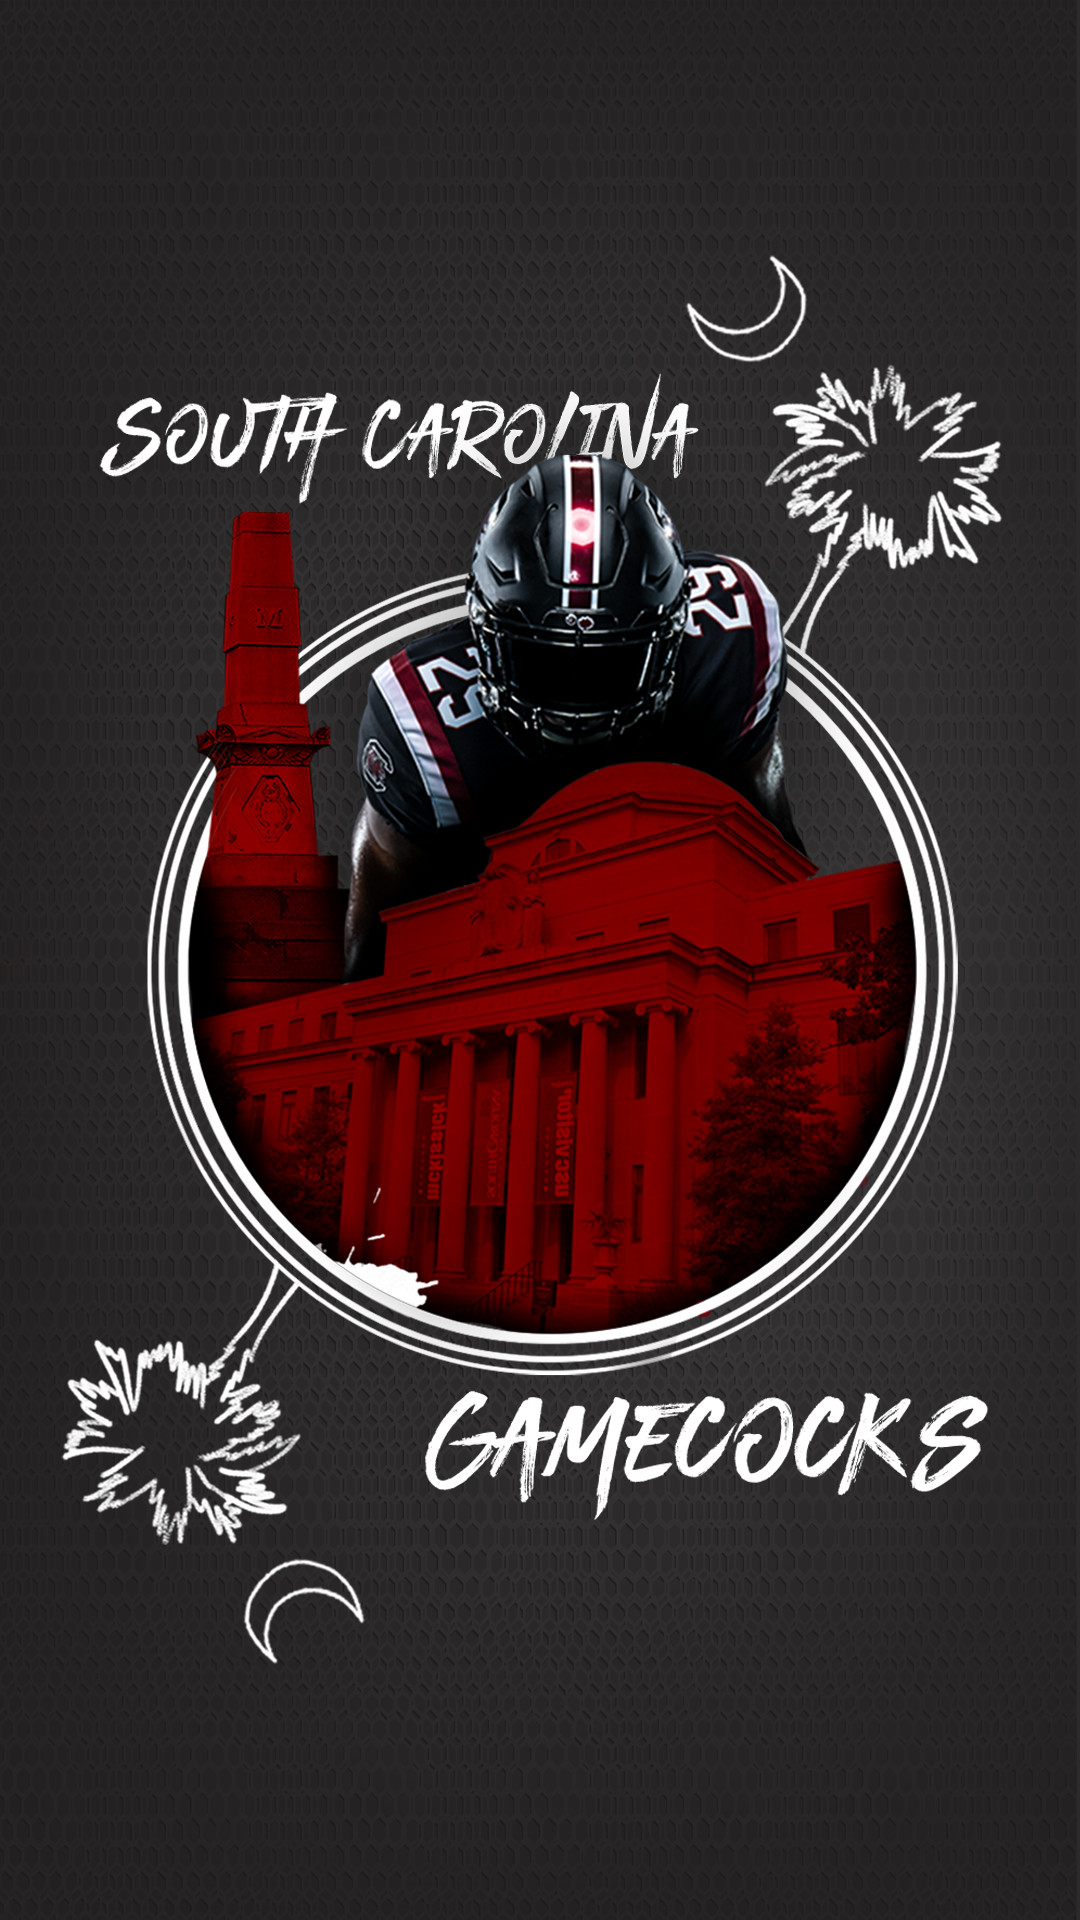 1080x1920 Wallpaper displaying two iconic University features, the palmetto tree, and  gamecock football